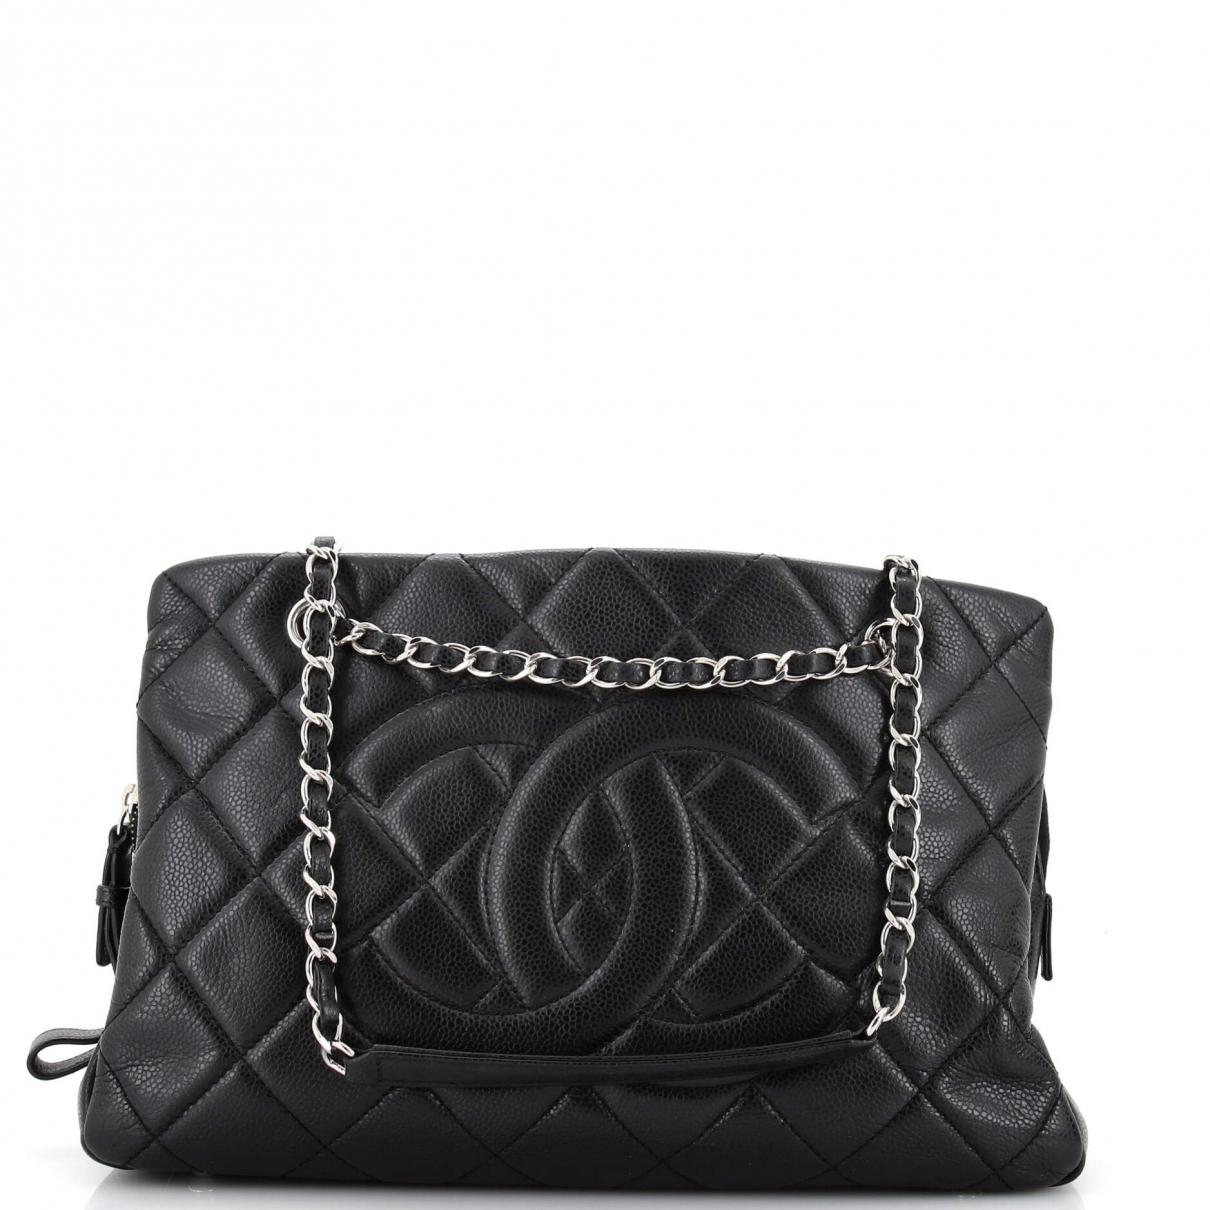 Chanel - Authenticated Coco Luxe Handbag - Leather Black Plain for Women, Very Good Condition